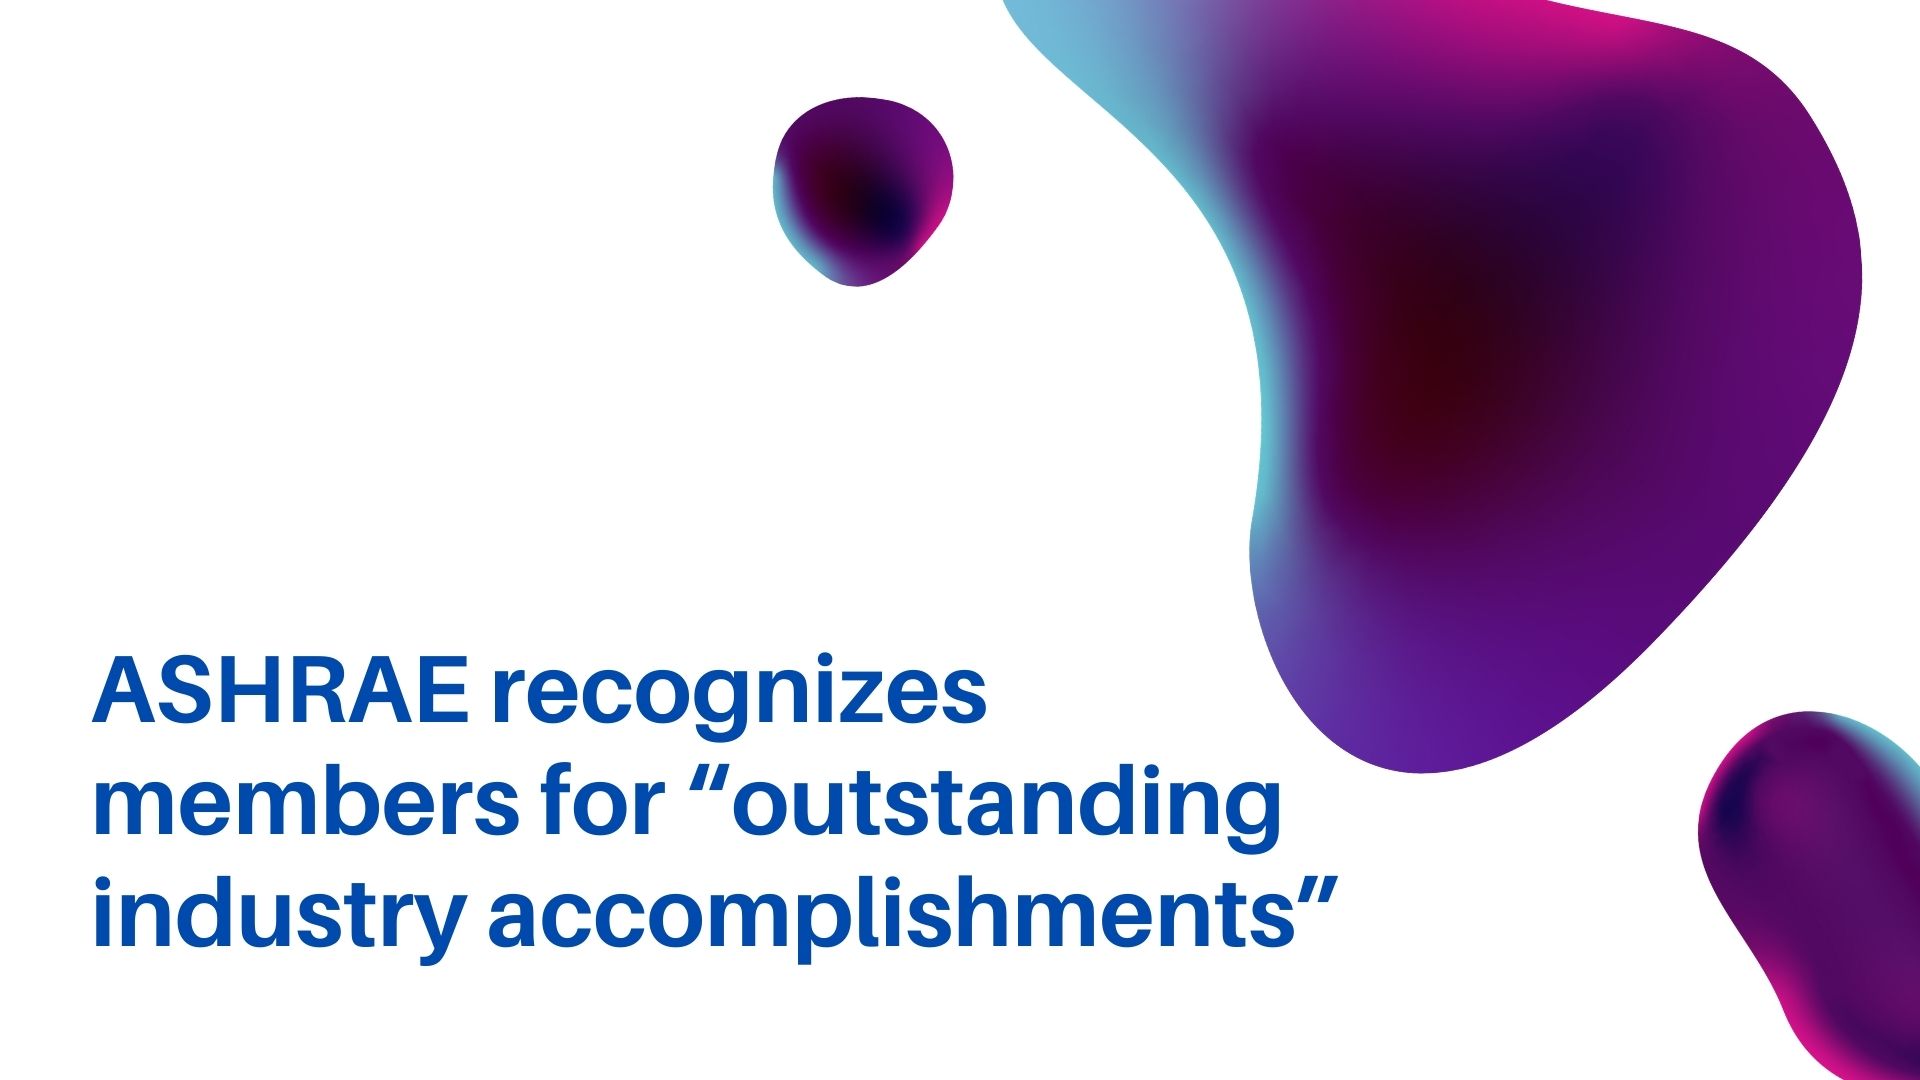 ASHRAE recognizes members for “outstanding industry accomplishments”